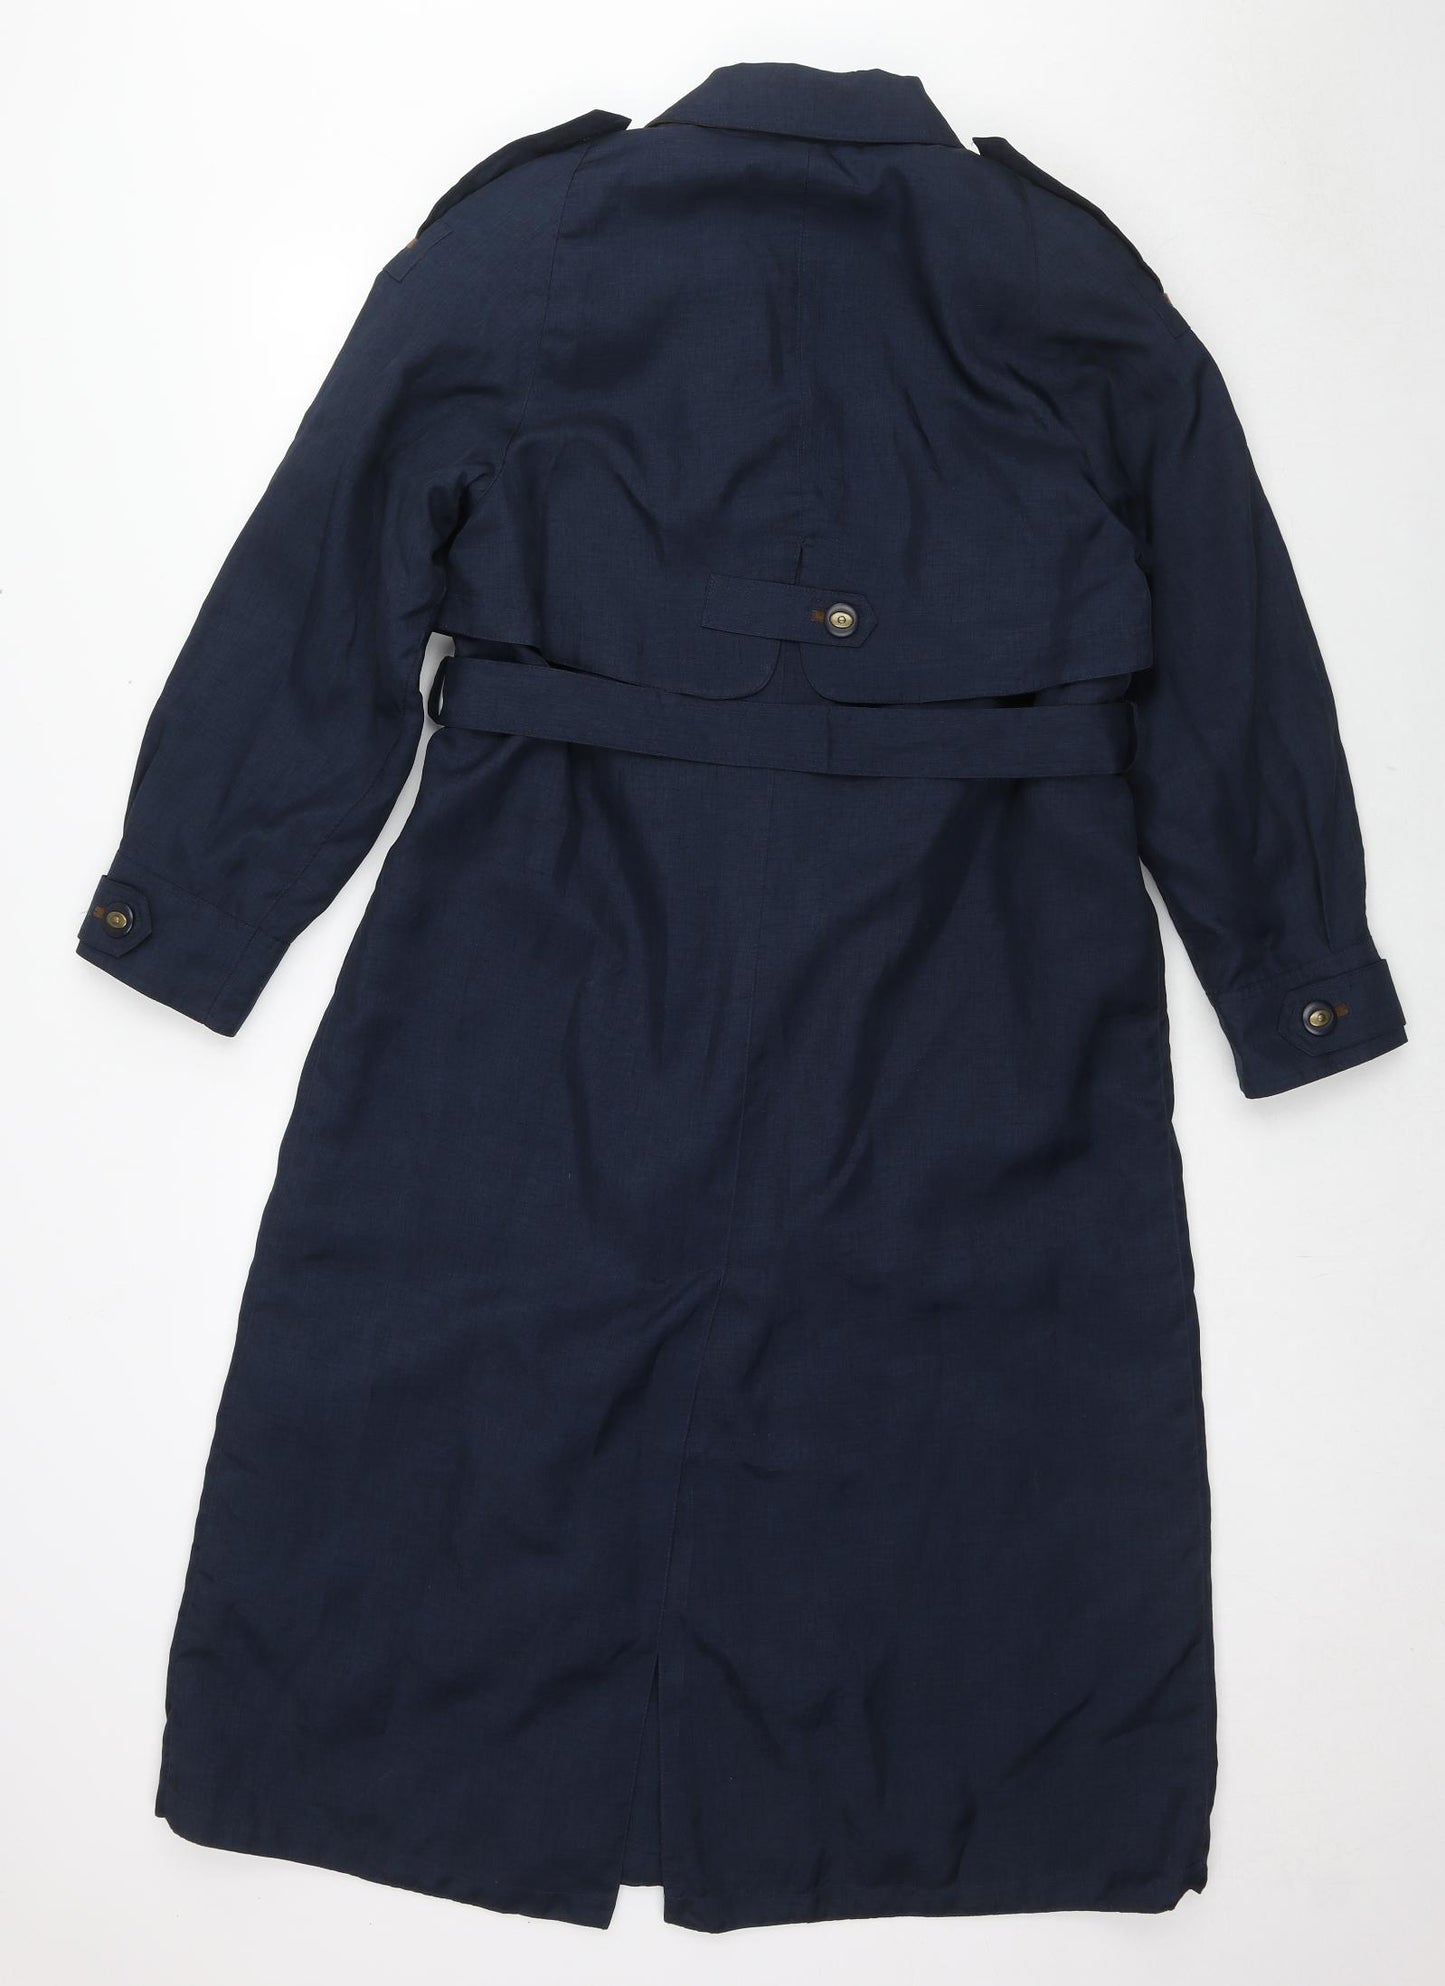 Marlbeck Womens Blue Trench Coat Jacket Size 12 Button